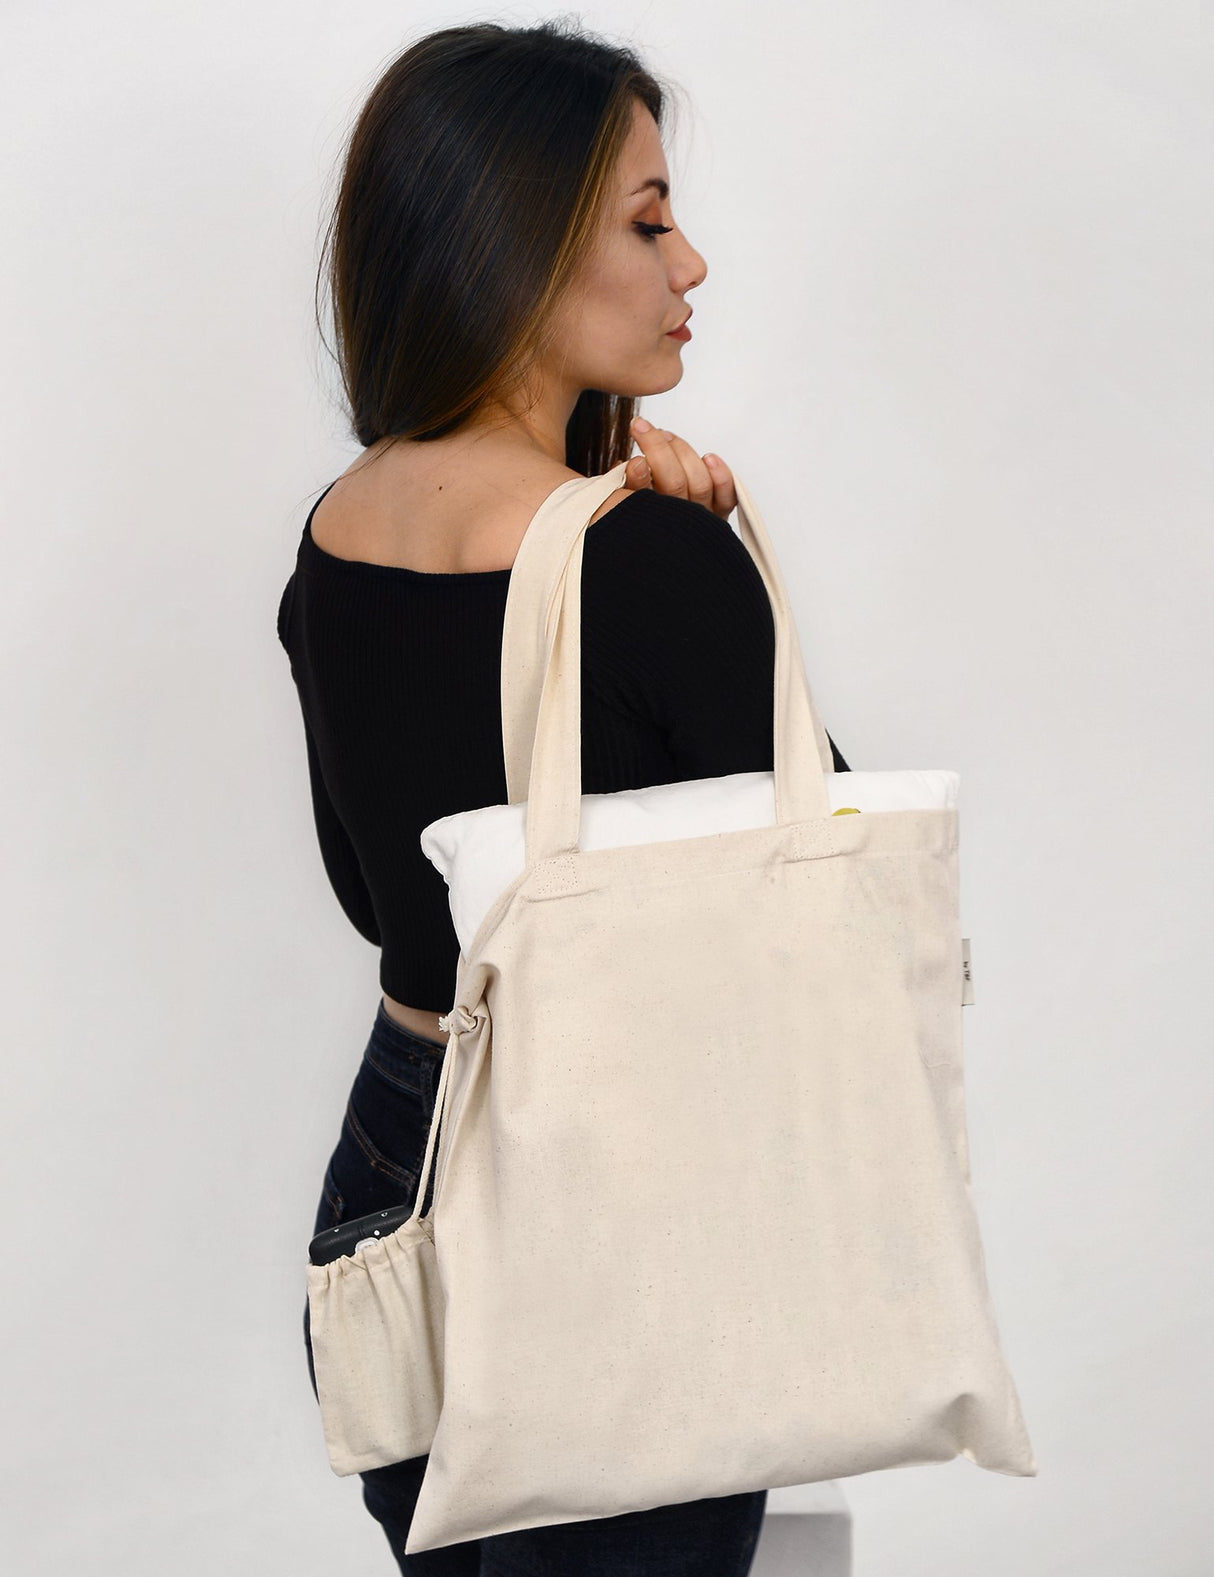 Foldable Storage Nylon Tote Recycled Cotton Shopping Tote Canvas